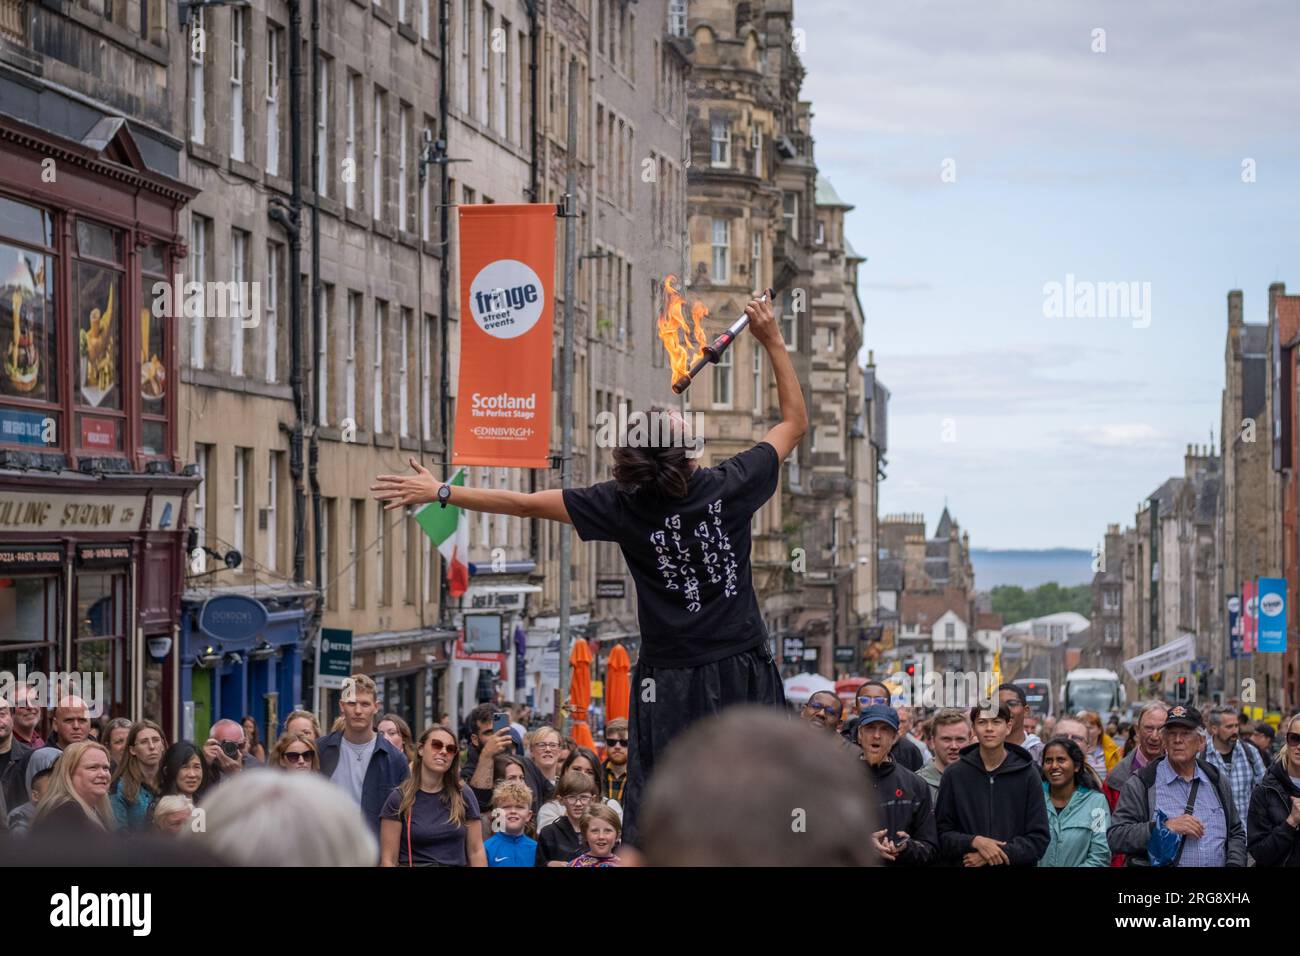 A fire eating street performer surrounded by crowds performs on the Royal Mile in Edinburgh during the Fringe festival, August 2023. Scotland, UK. Stock Photo